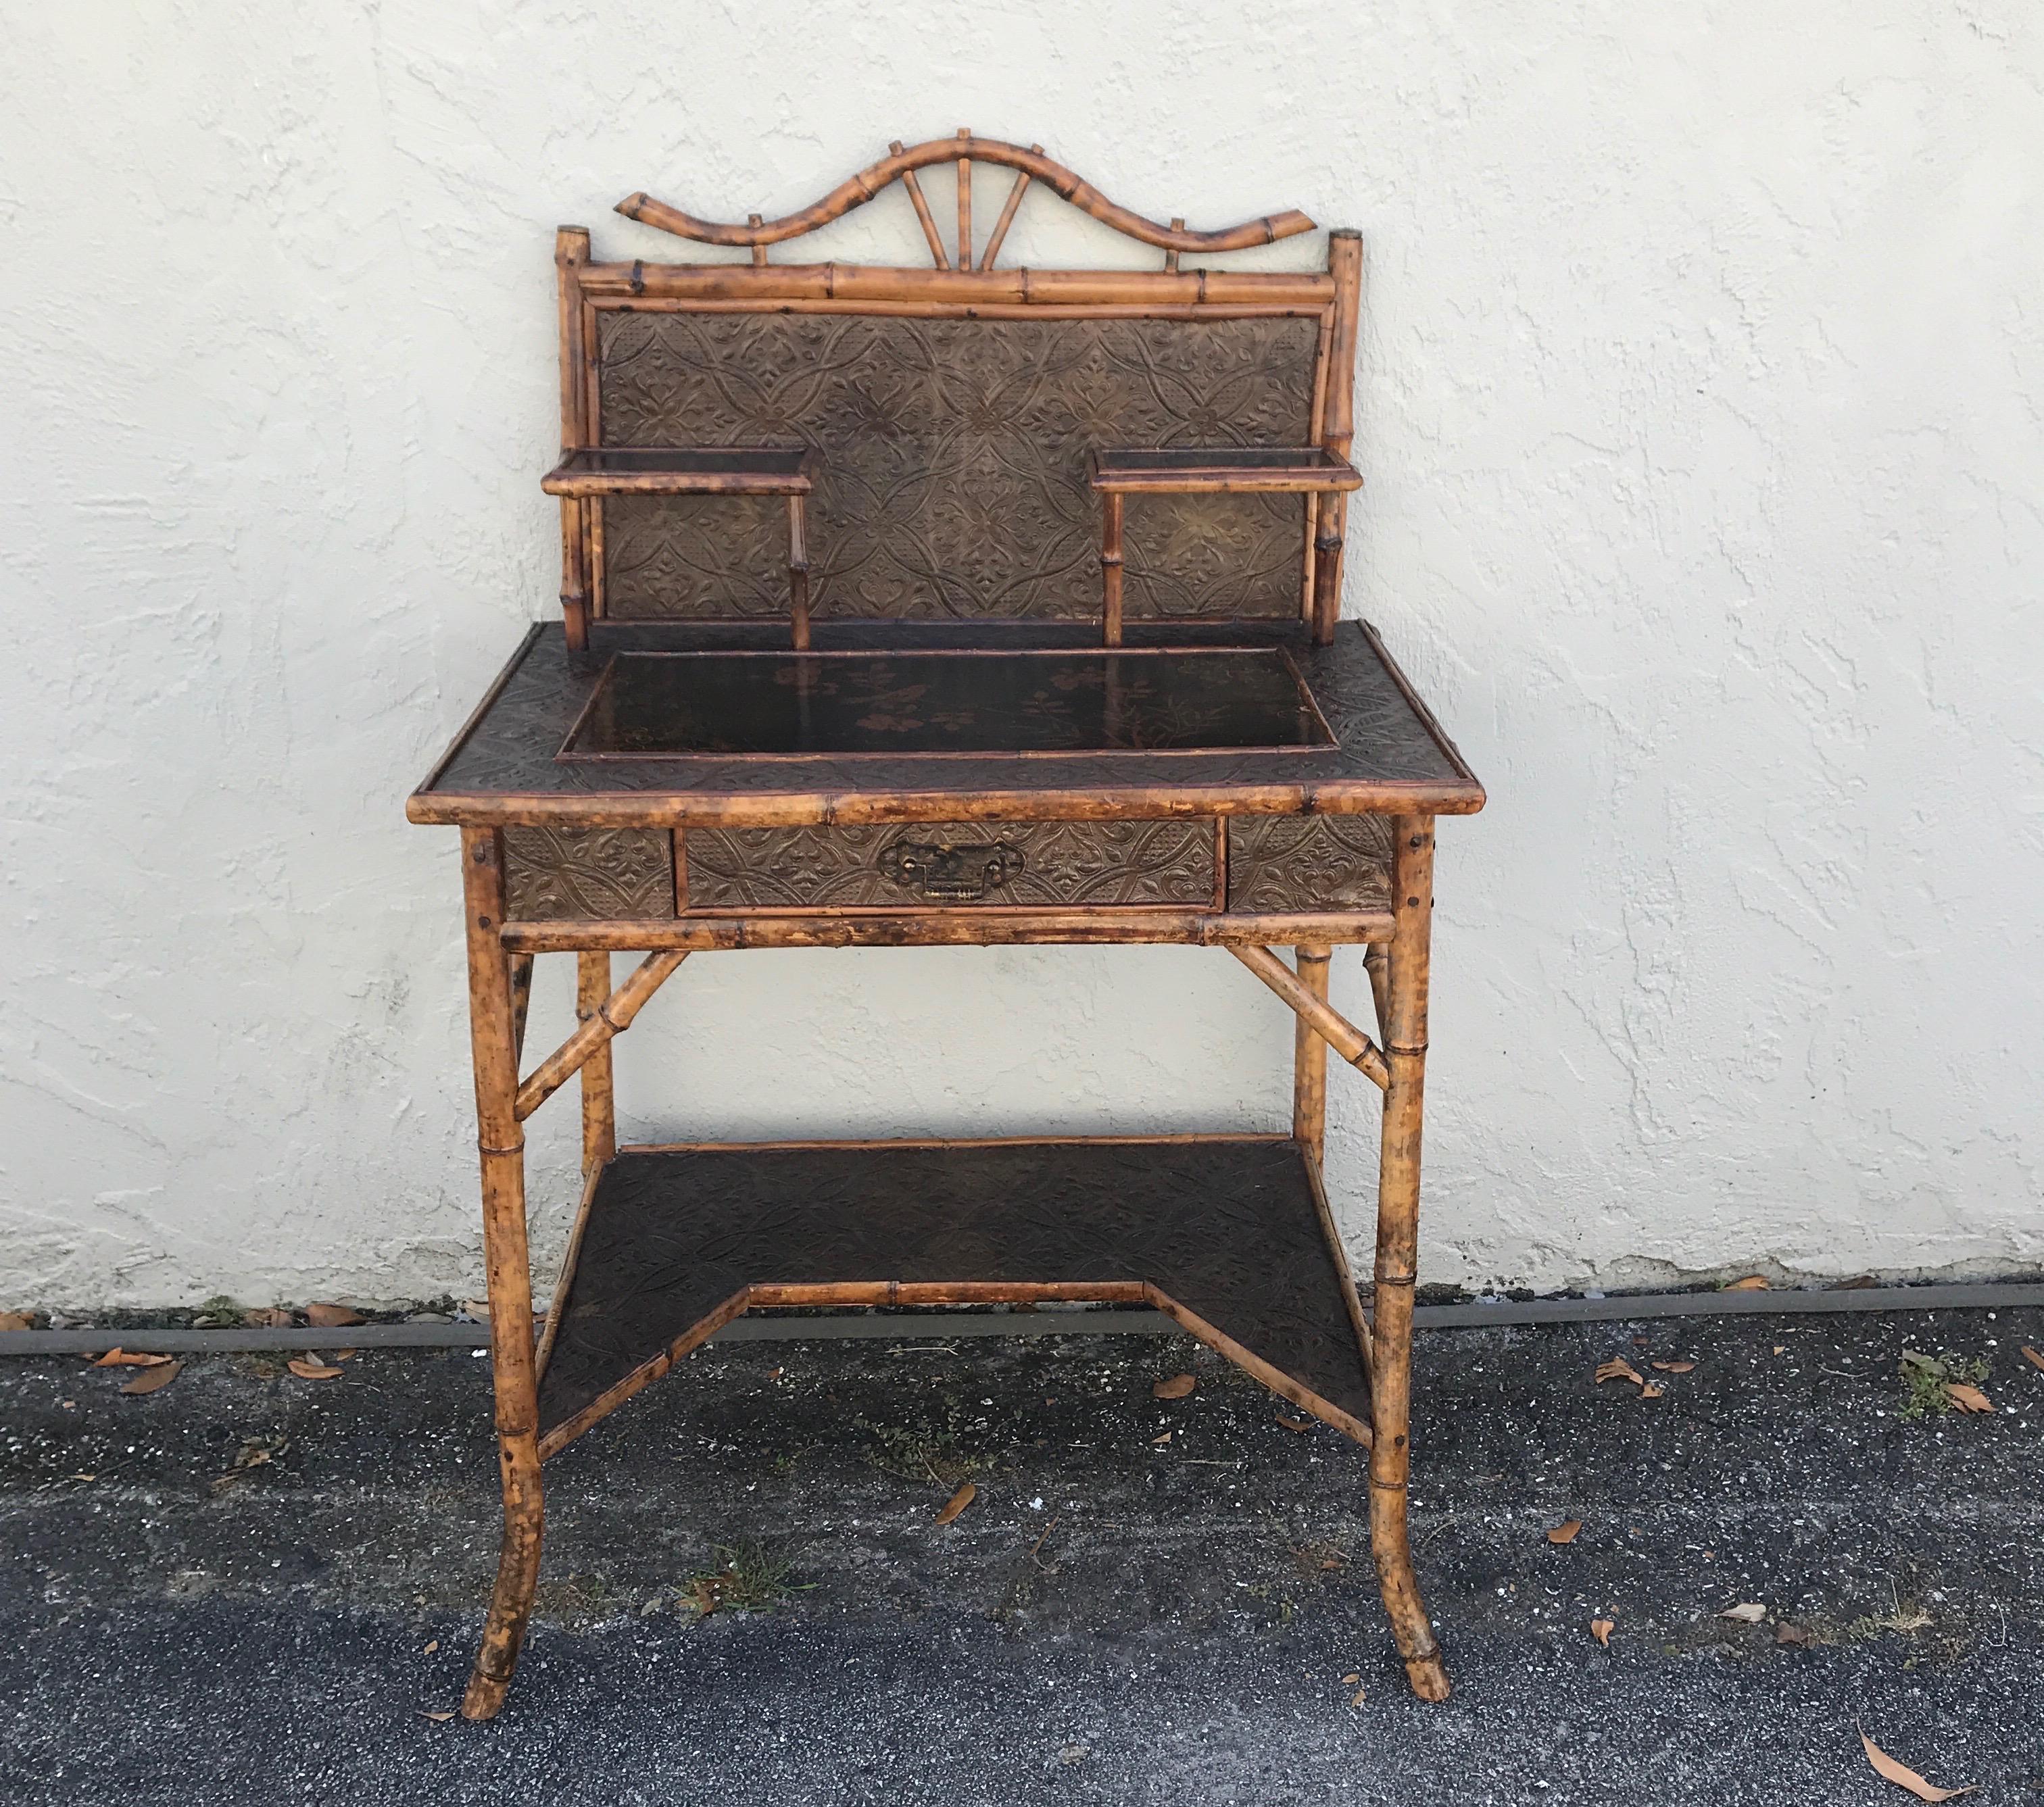 19th century bamboo writing or dressing table with one-drawer.